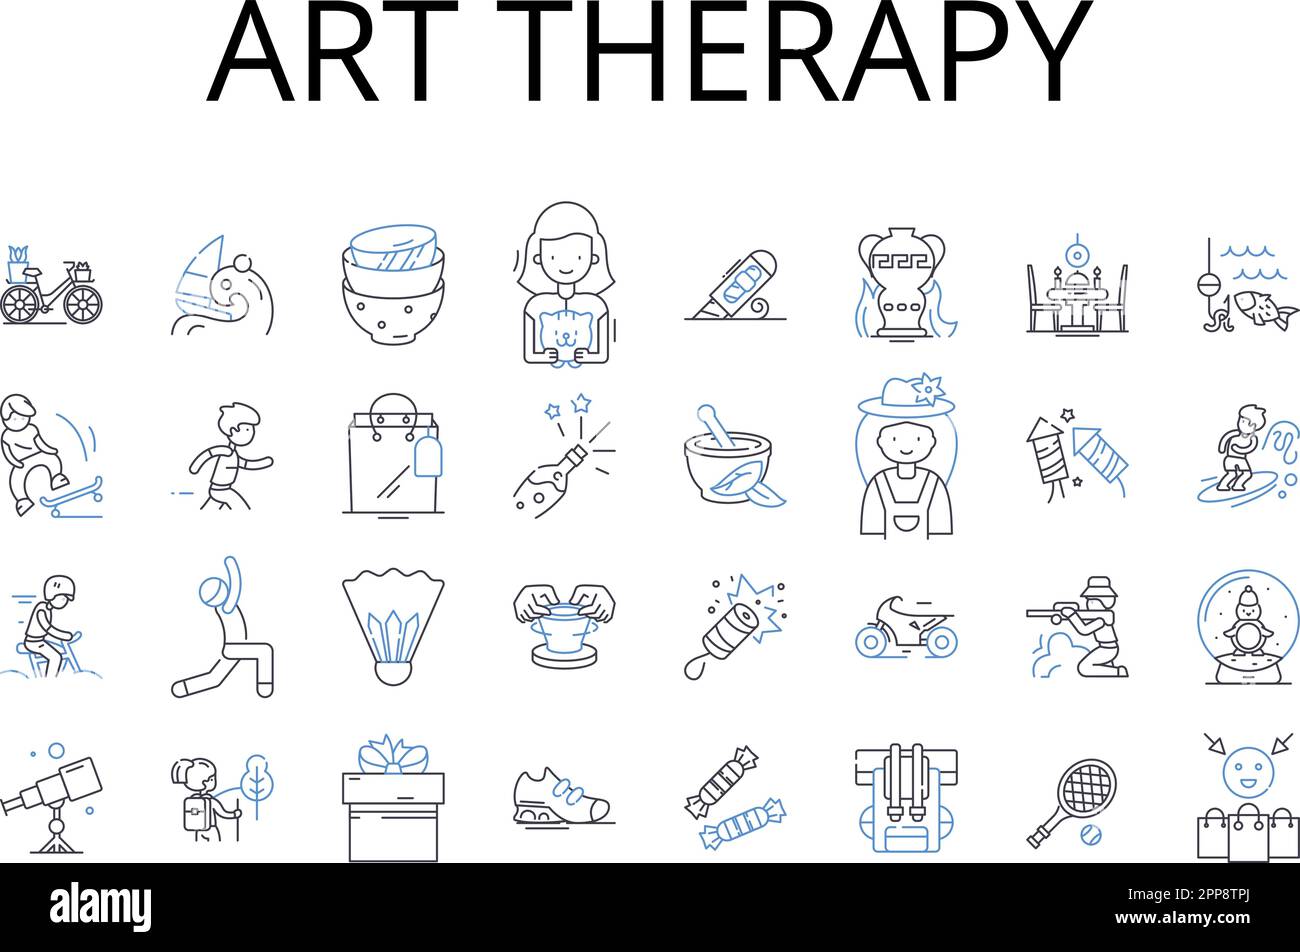 Art therapy line icons collection. Music therapy, Play therapy, Drama therapy, Movement therapy, Narrative therapy, Gestalt therapy, Poetry therapy Stock Vector